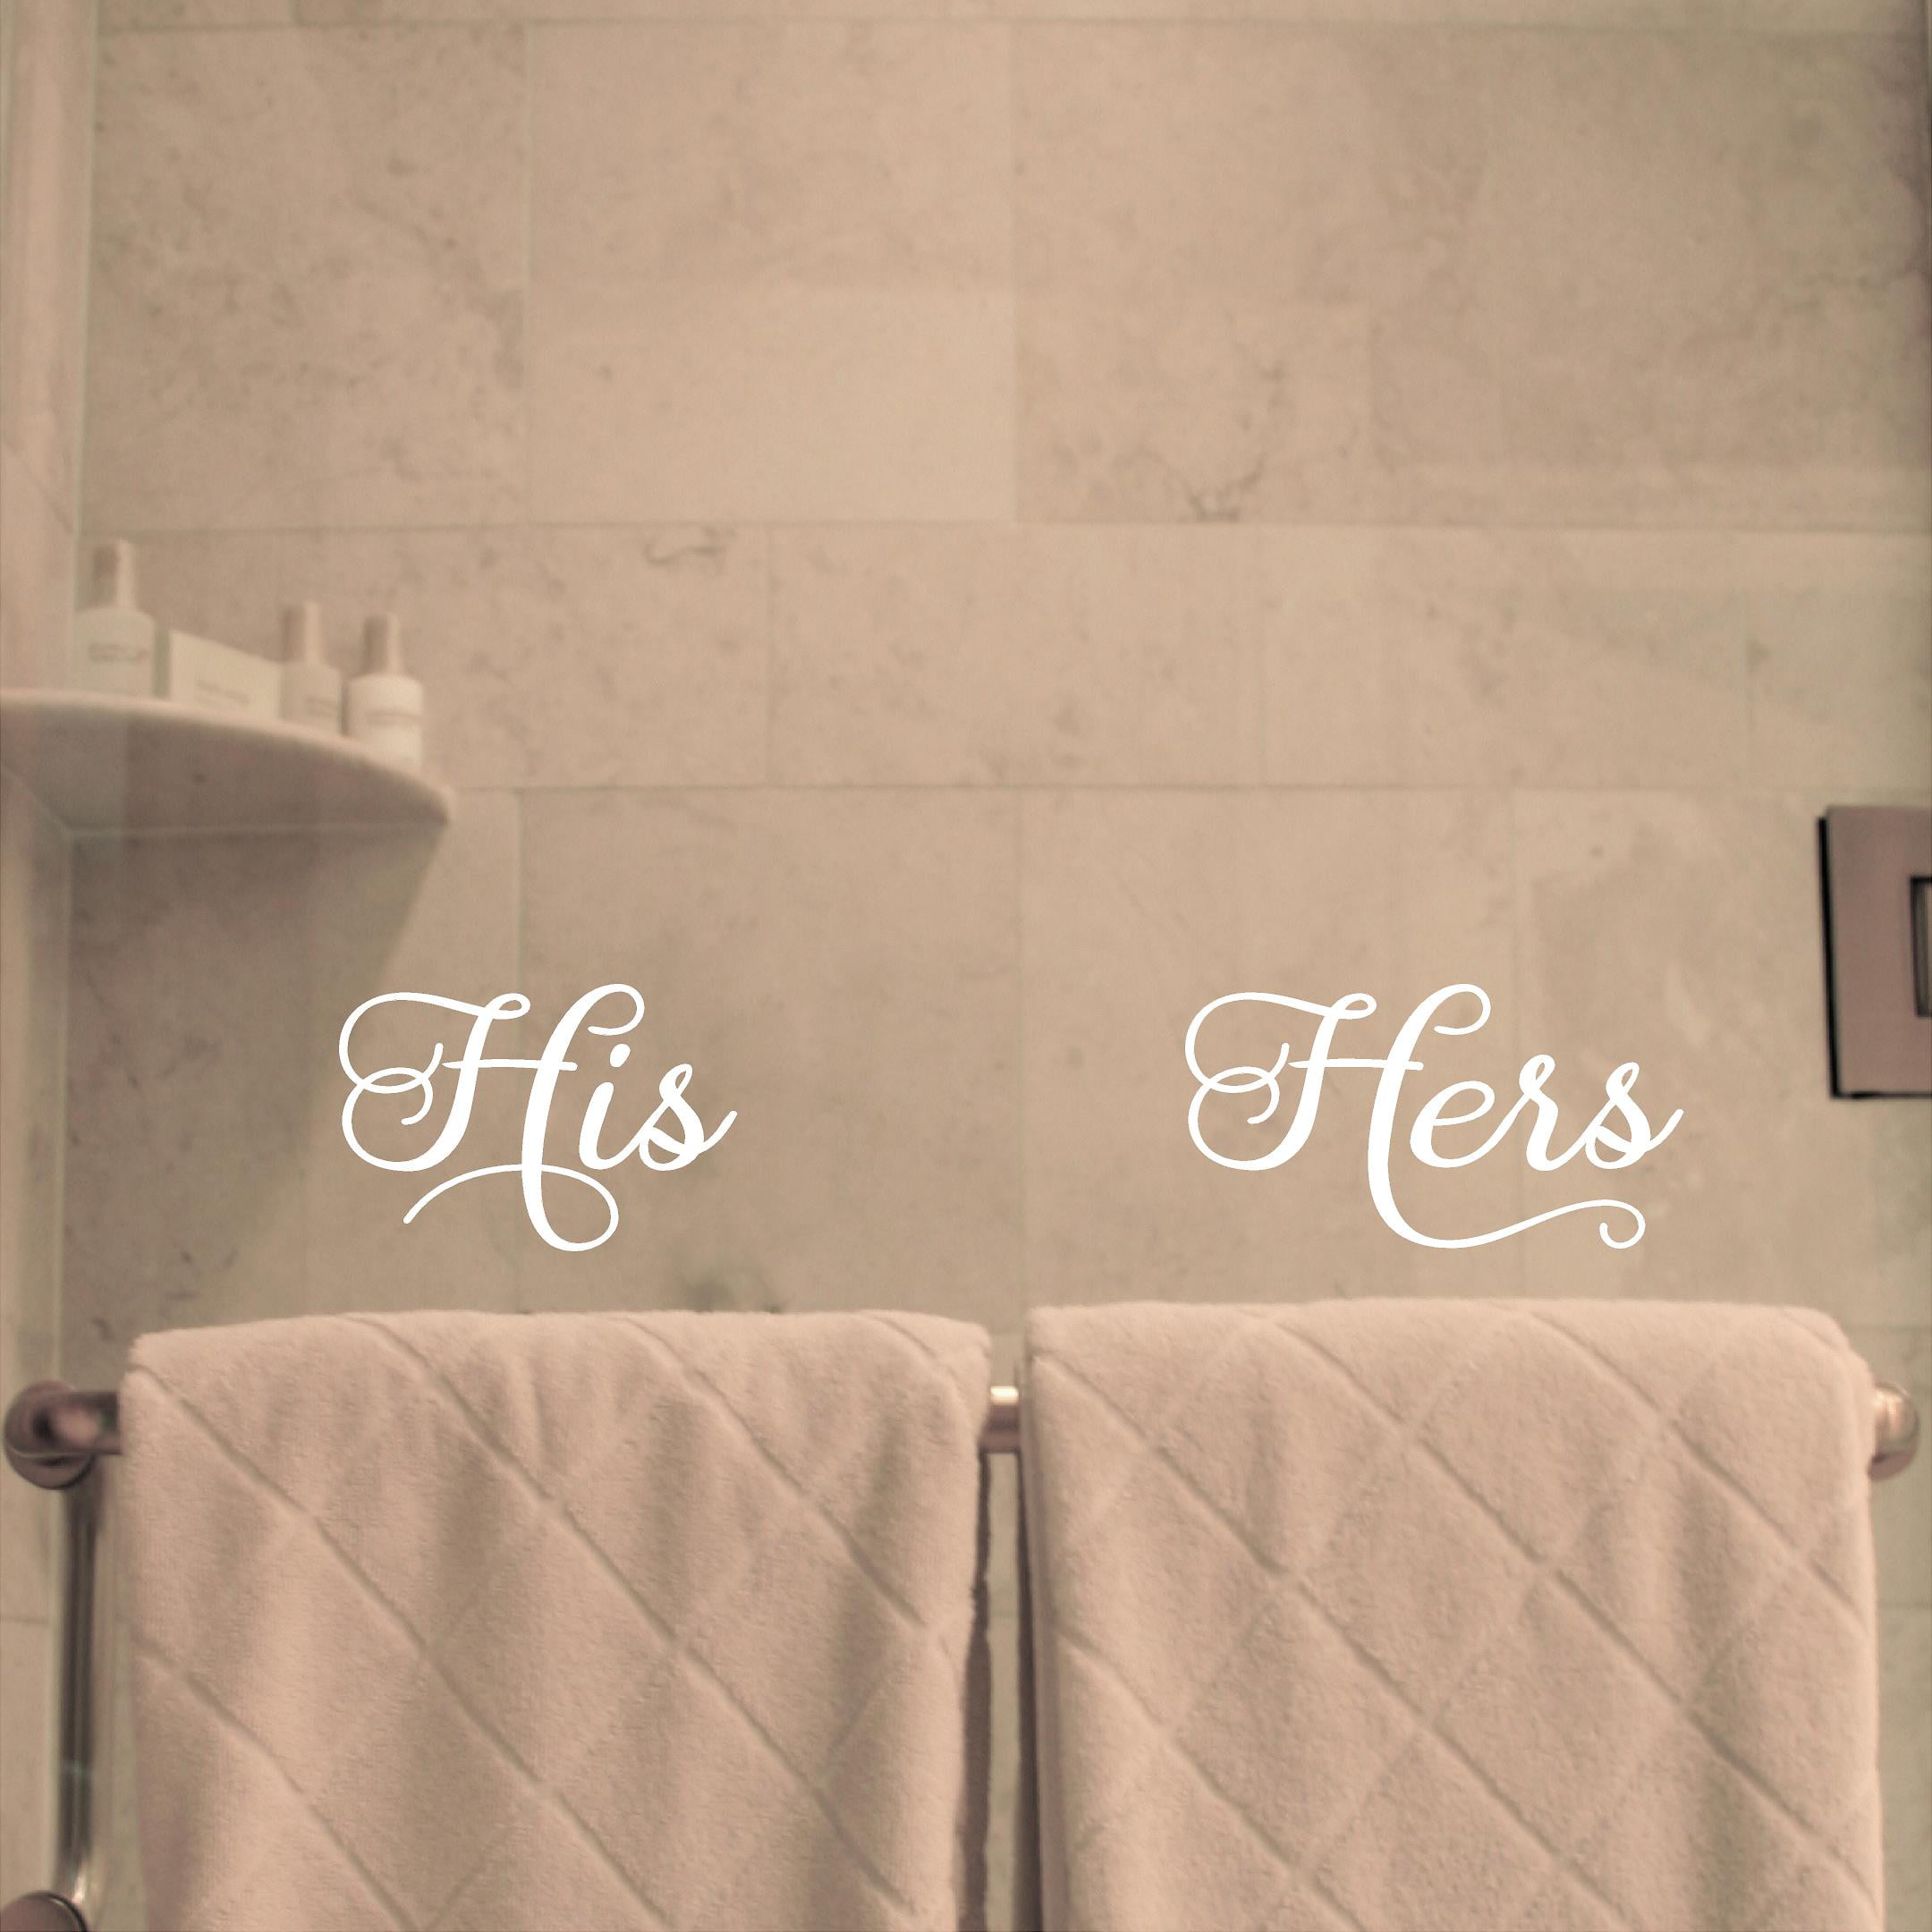 His and Hers Vinyl Lettering Wall Decal Sticker Bathroom Decals Size: 6H x  9L, 6H x 11L - Color: Black 